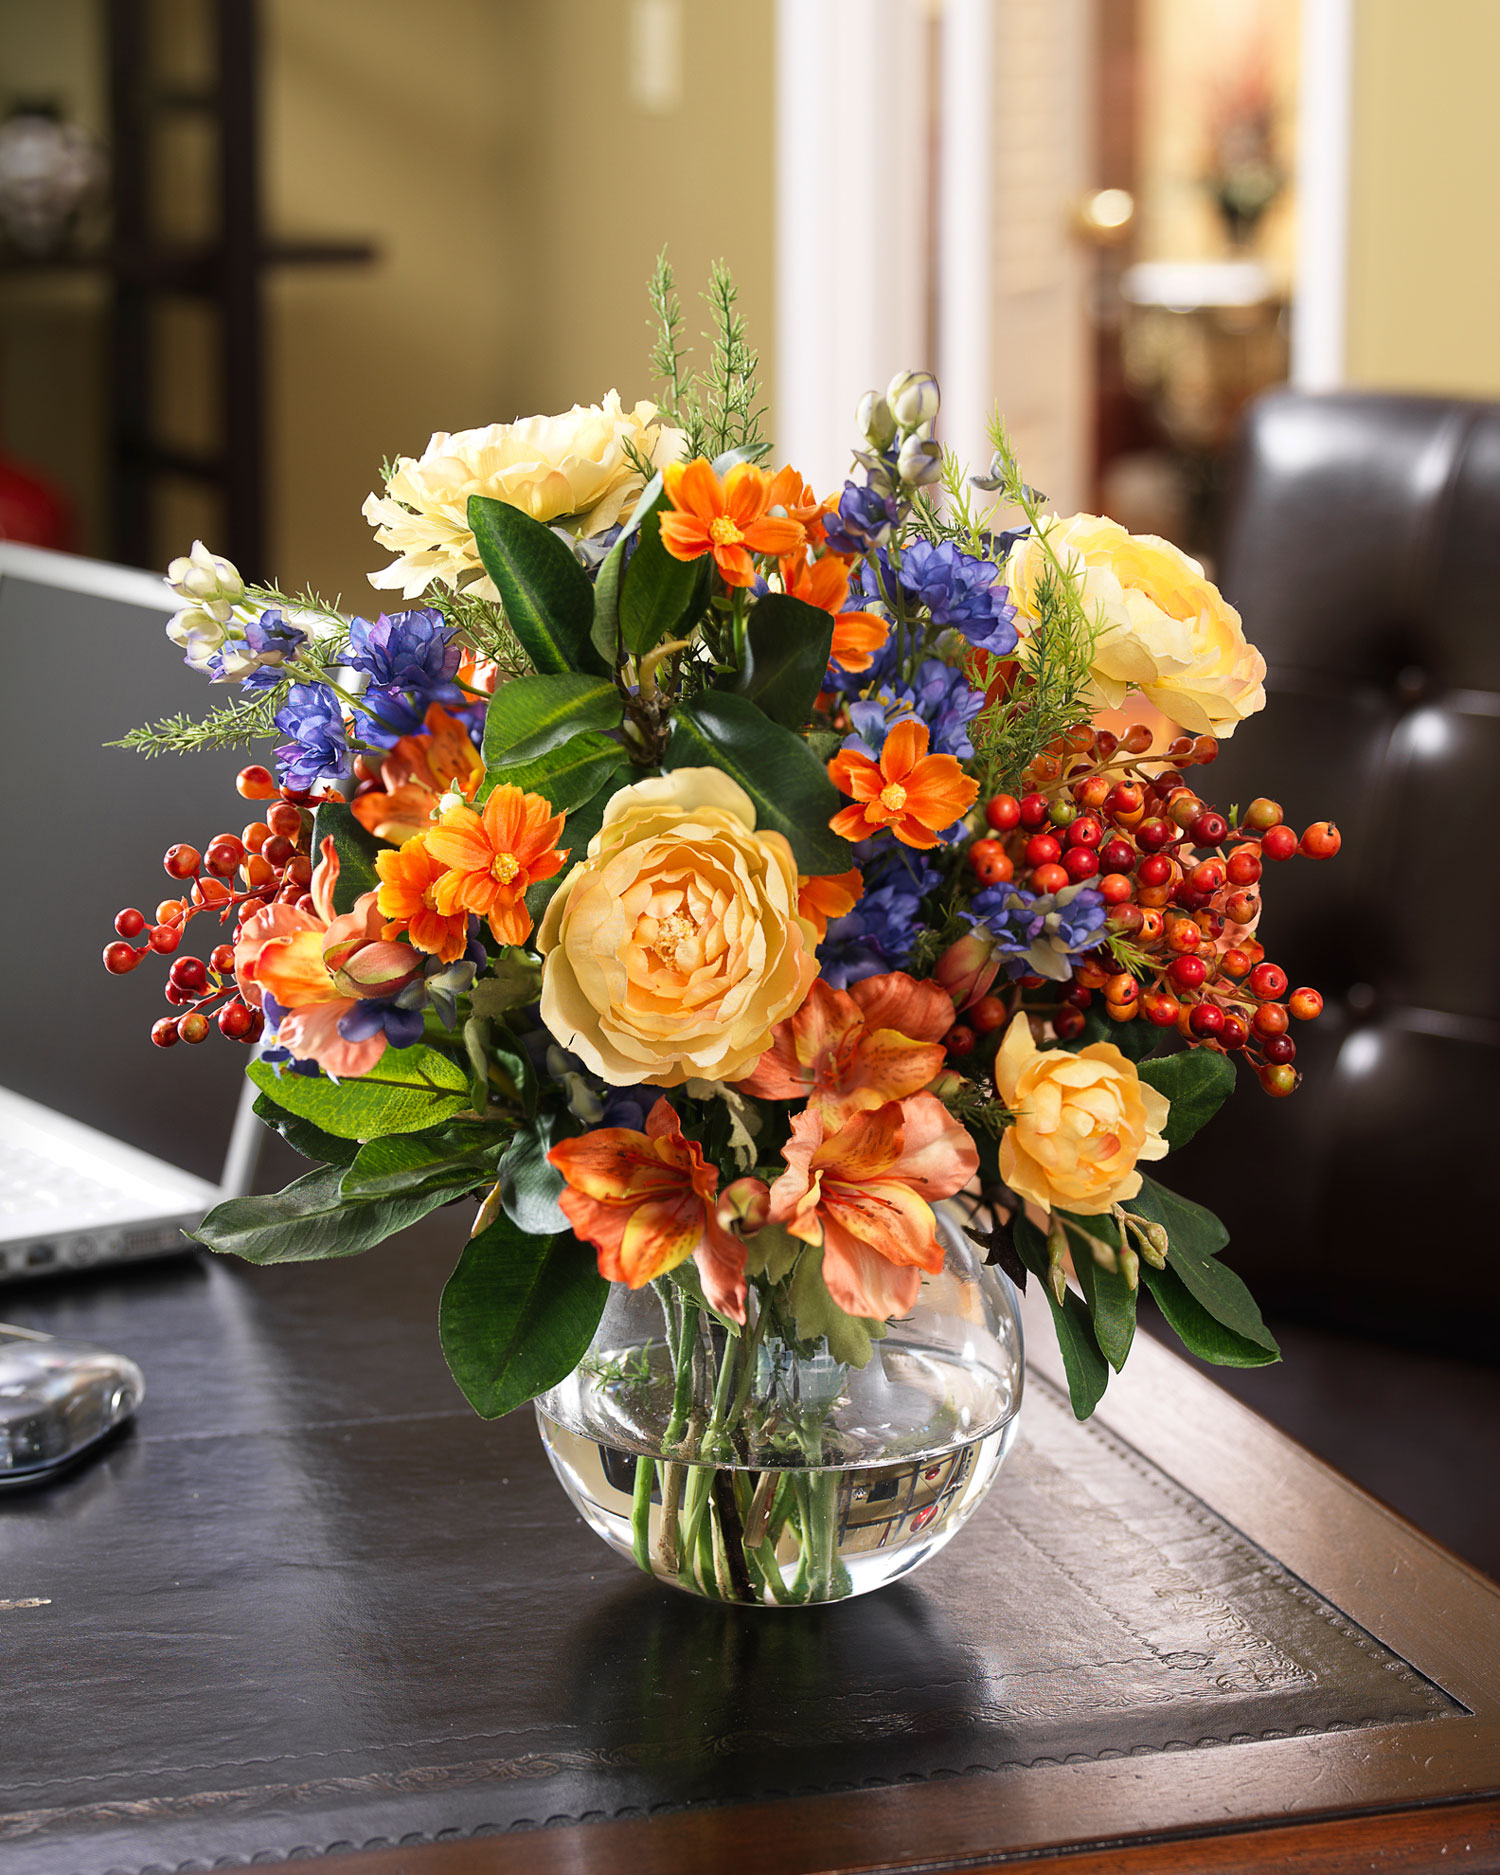 Silk Flower yellow ranunculus, blue delphinium, and colorful berries and coral alstroemeria